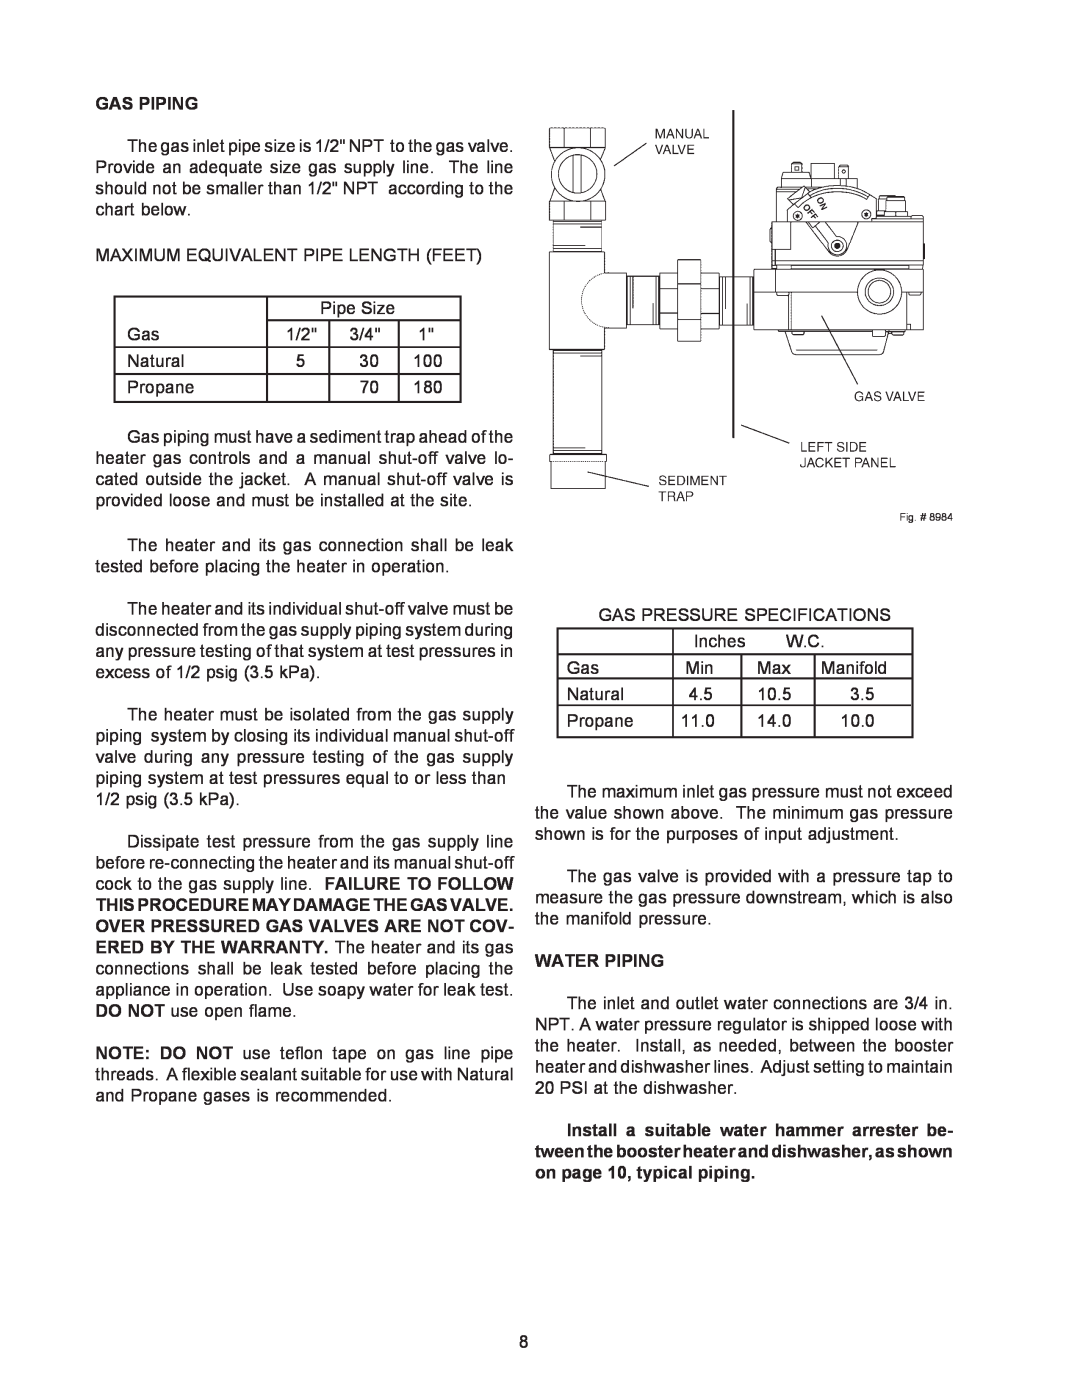 Raypak B-195 installation instructions Gas Piping, Water Piping, Fig. # 